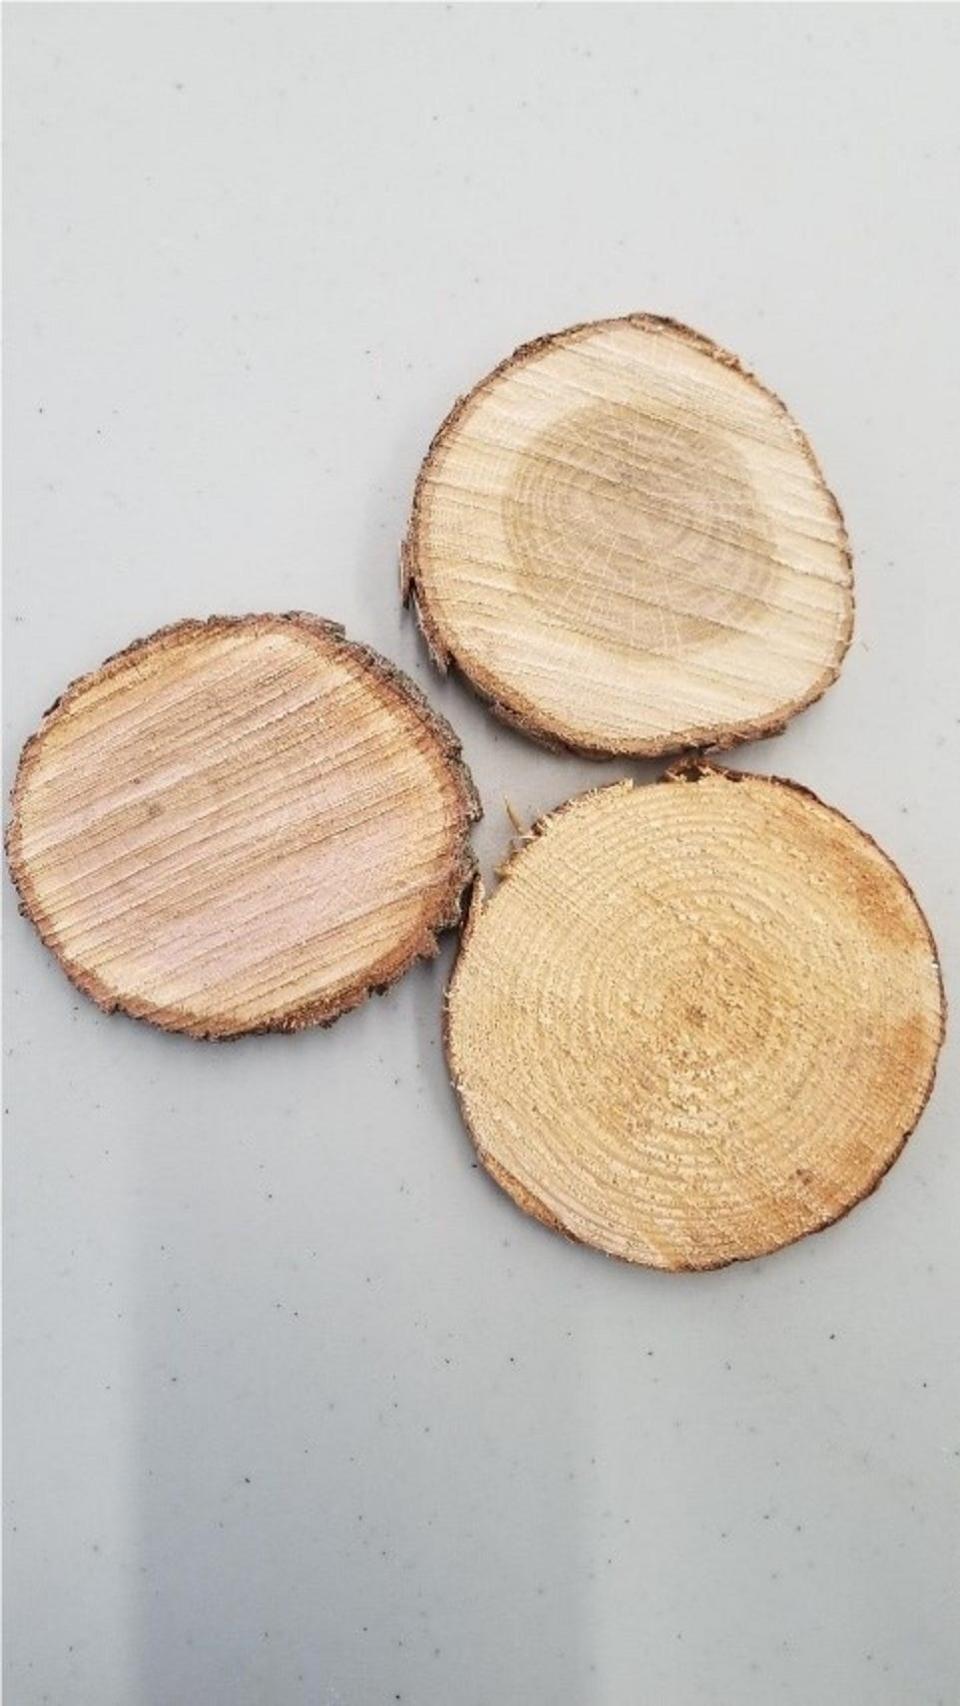 The trunks of used Christmas trees can be cut to make drink coasters.